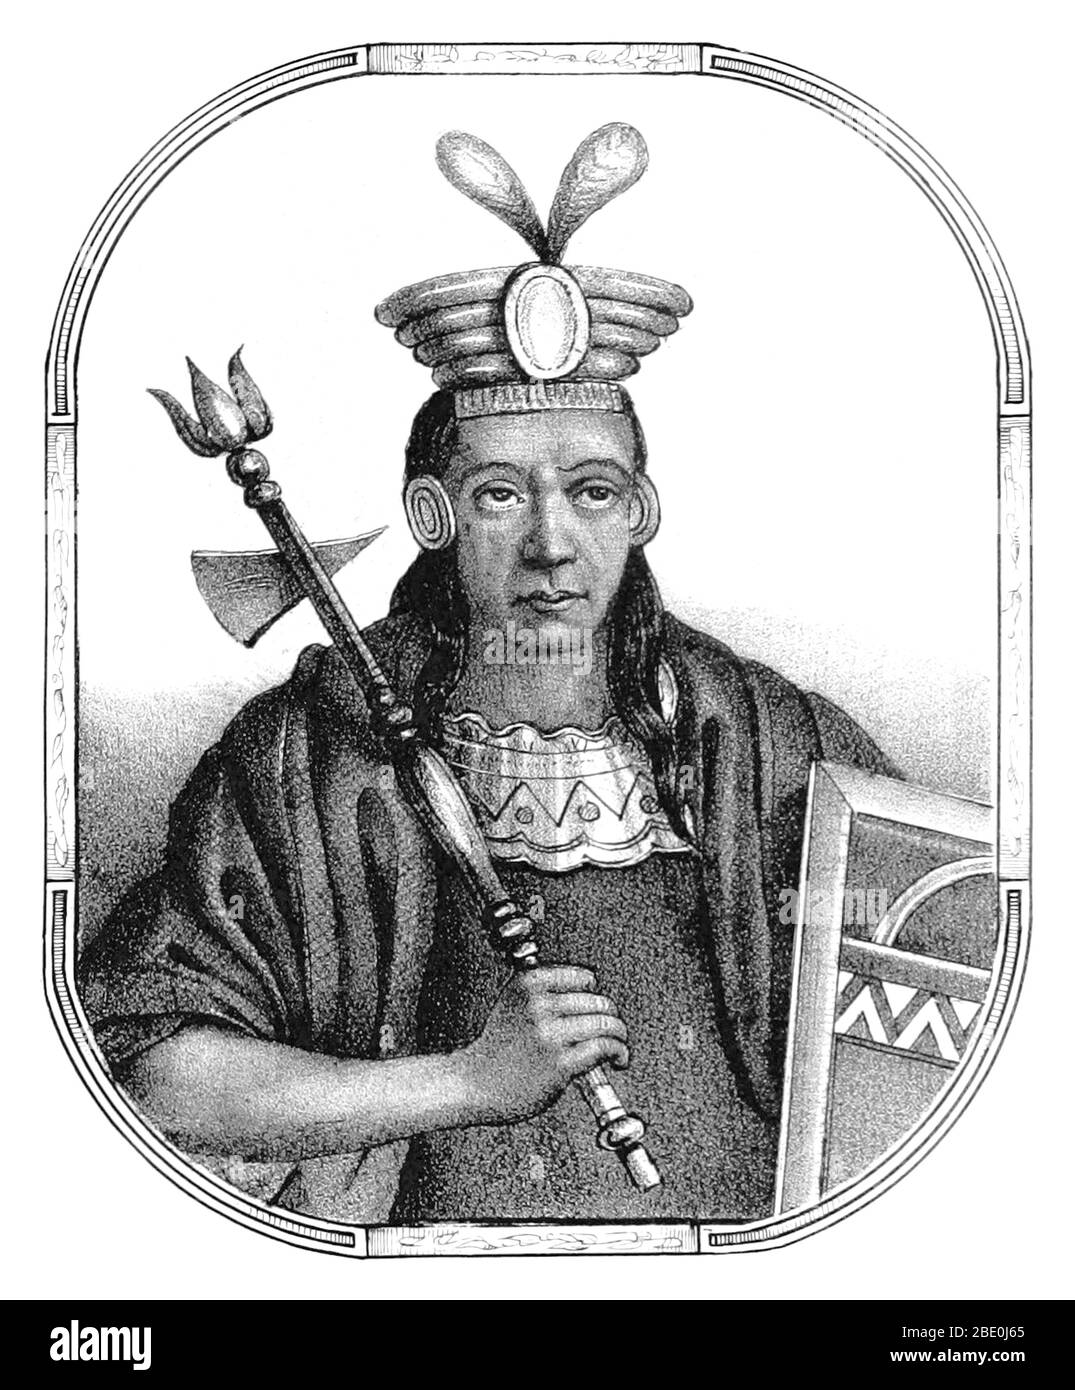 Mayta Cápac (Mayta Qhapaq Inka) was the fourth Sapa Inca of the Kingdom of Cuzco (beginning around 1290) and a member of the Hurin dynasty. The chroniclers describe him as a great warrior who conquered territories as far as Lake Titicaca, Arequipa, and Potosí. While in fact, his kingdom was still limited to the valley of Cuzco. In 1134, Mayta Cápac put the regions of Arequipa and Moquegua under the control of the Inca empire. His great military feat was the subjugation of Alcabisas and Culunchimas tribes. Image taken from page 59 of 'Recuerdos de la Monarquia Peruana, ó bosquejo de la historia Stock Photo